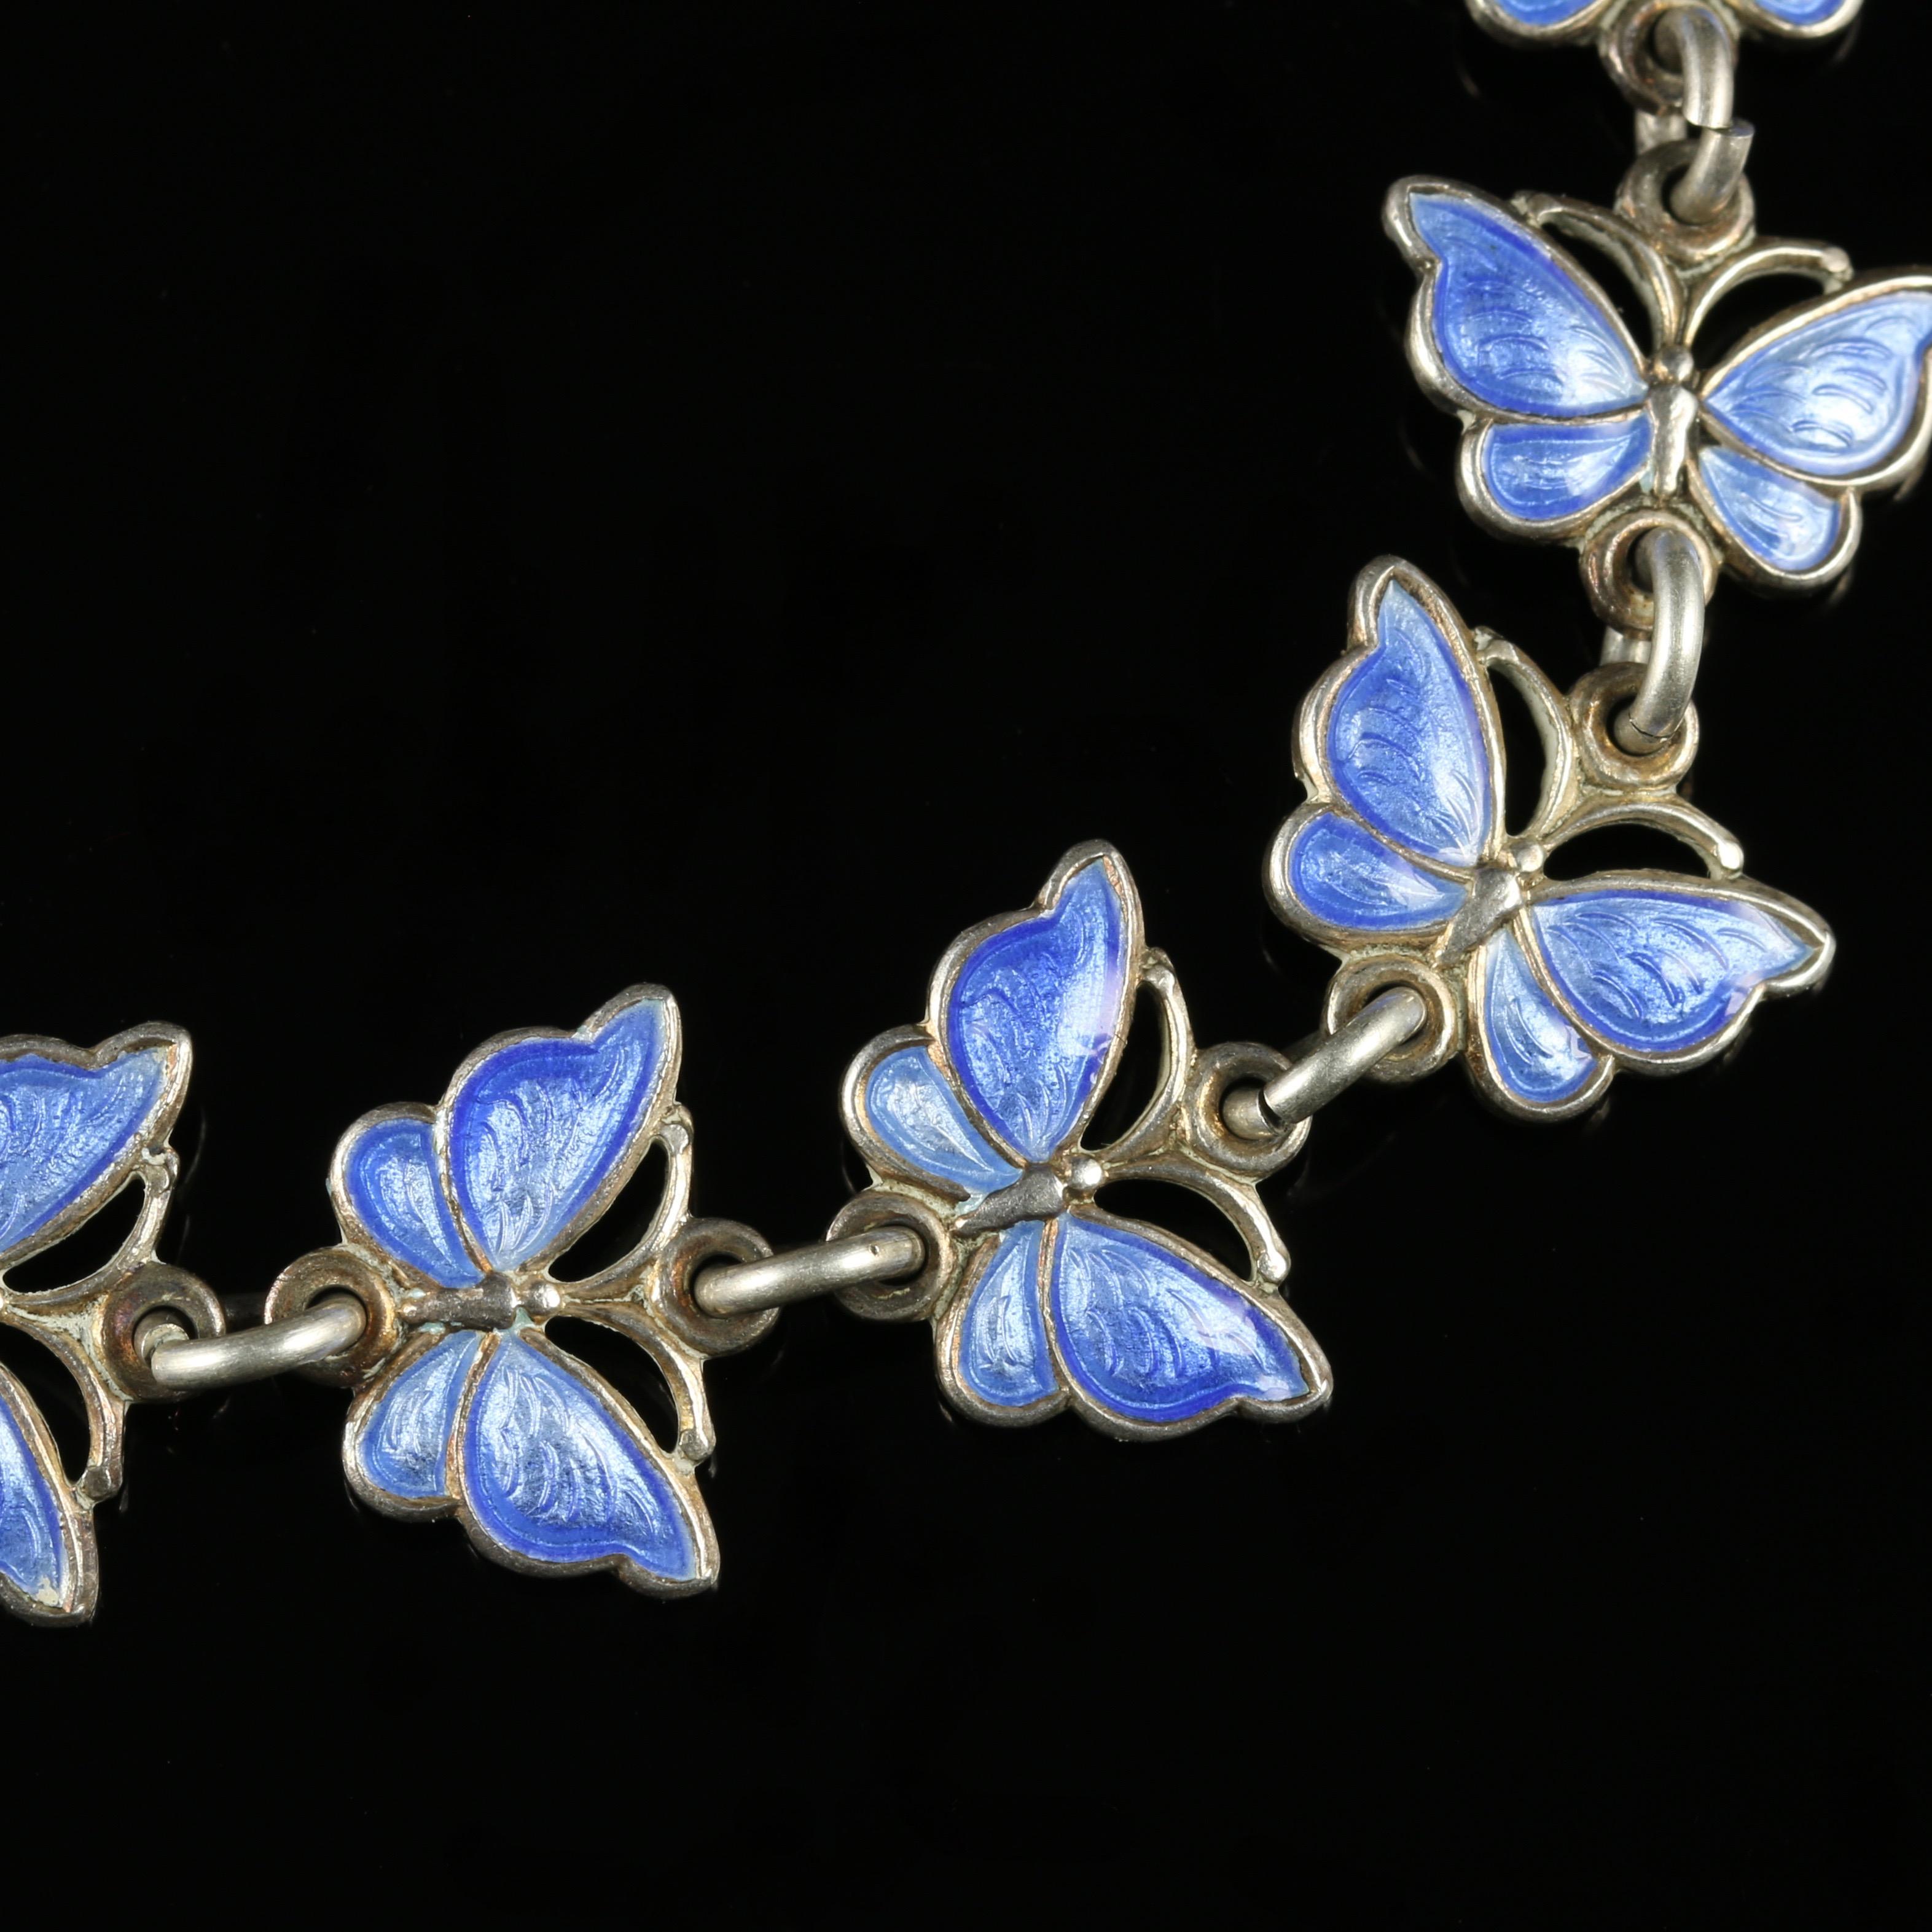 For more details please click continue reading down below...

This gorgeous genuine Antique Victorian bracelet is Circa 1900.

Set in Silver, this bracelet is adorned with 13 beautiful blue Enamel butterflies.

The butterflies all flutter in the